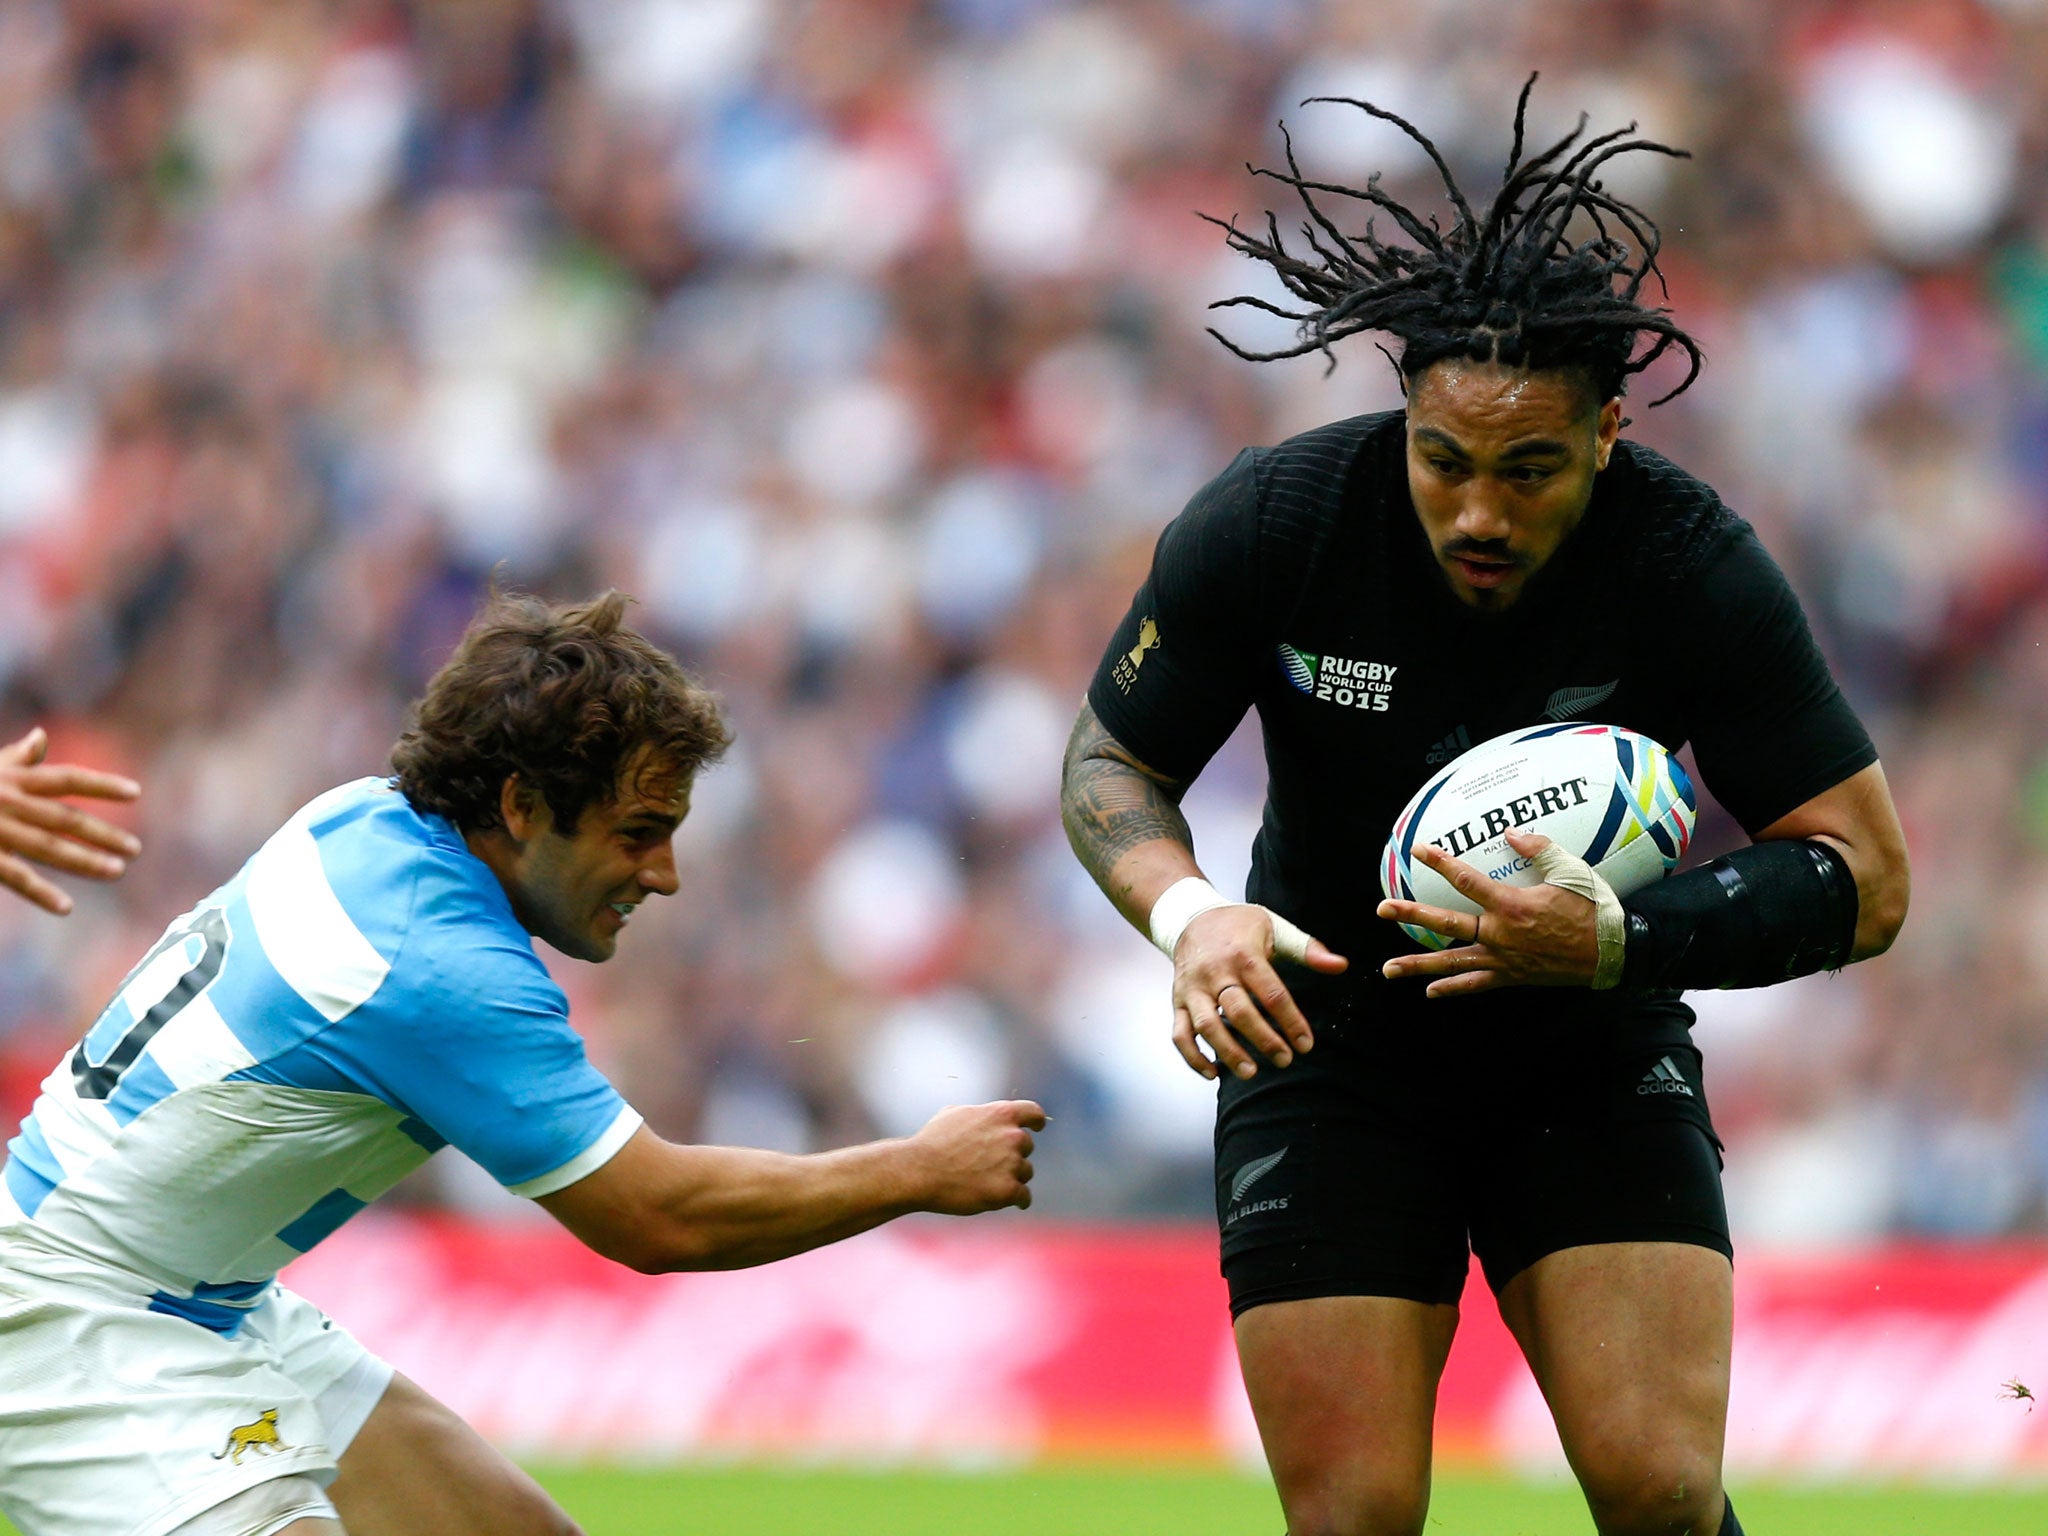 Ma'a Nonu is set to win his 100th cap for New Zealand